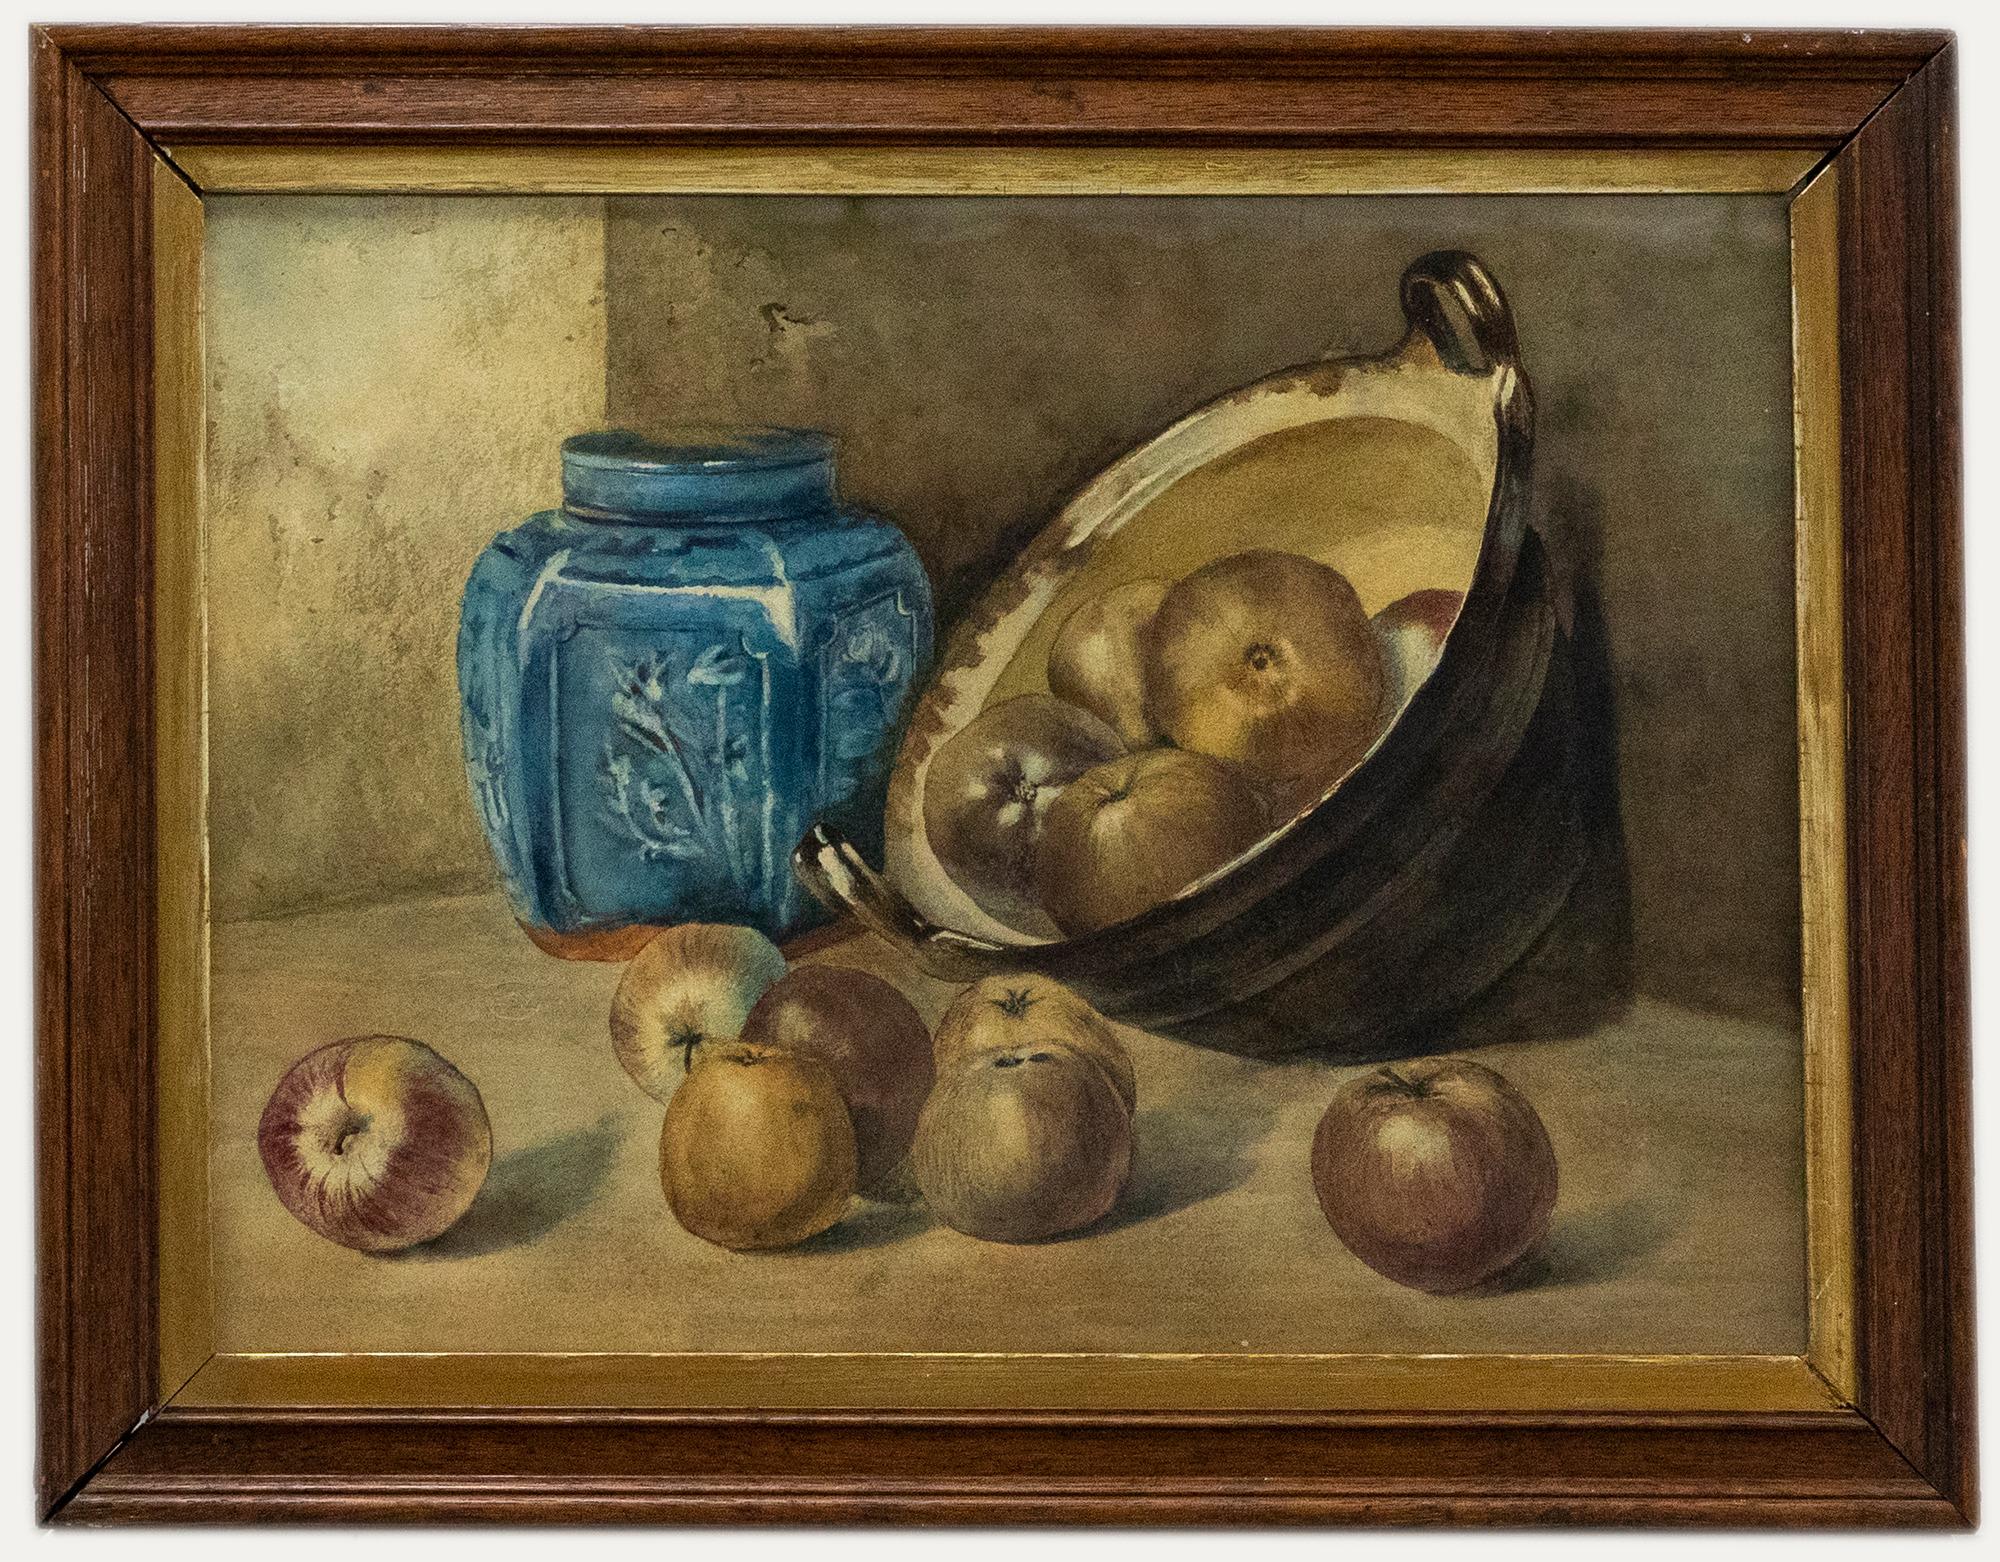 Unknown Still-Life - Framed Late 19th Century Watercolour - Still life with Chinese Jar